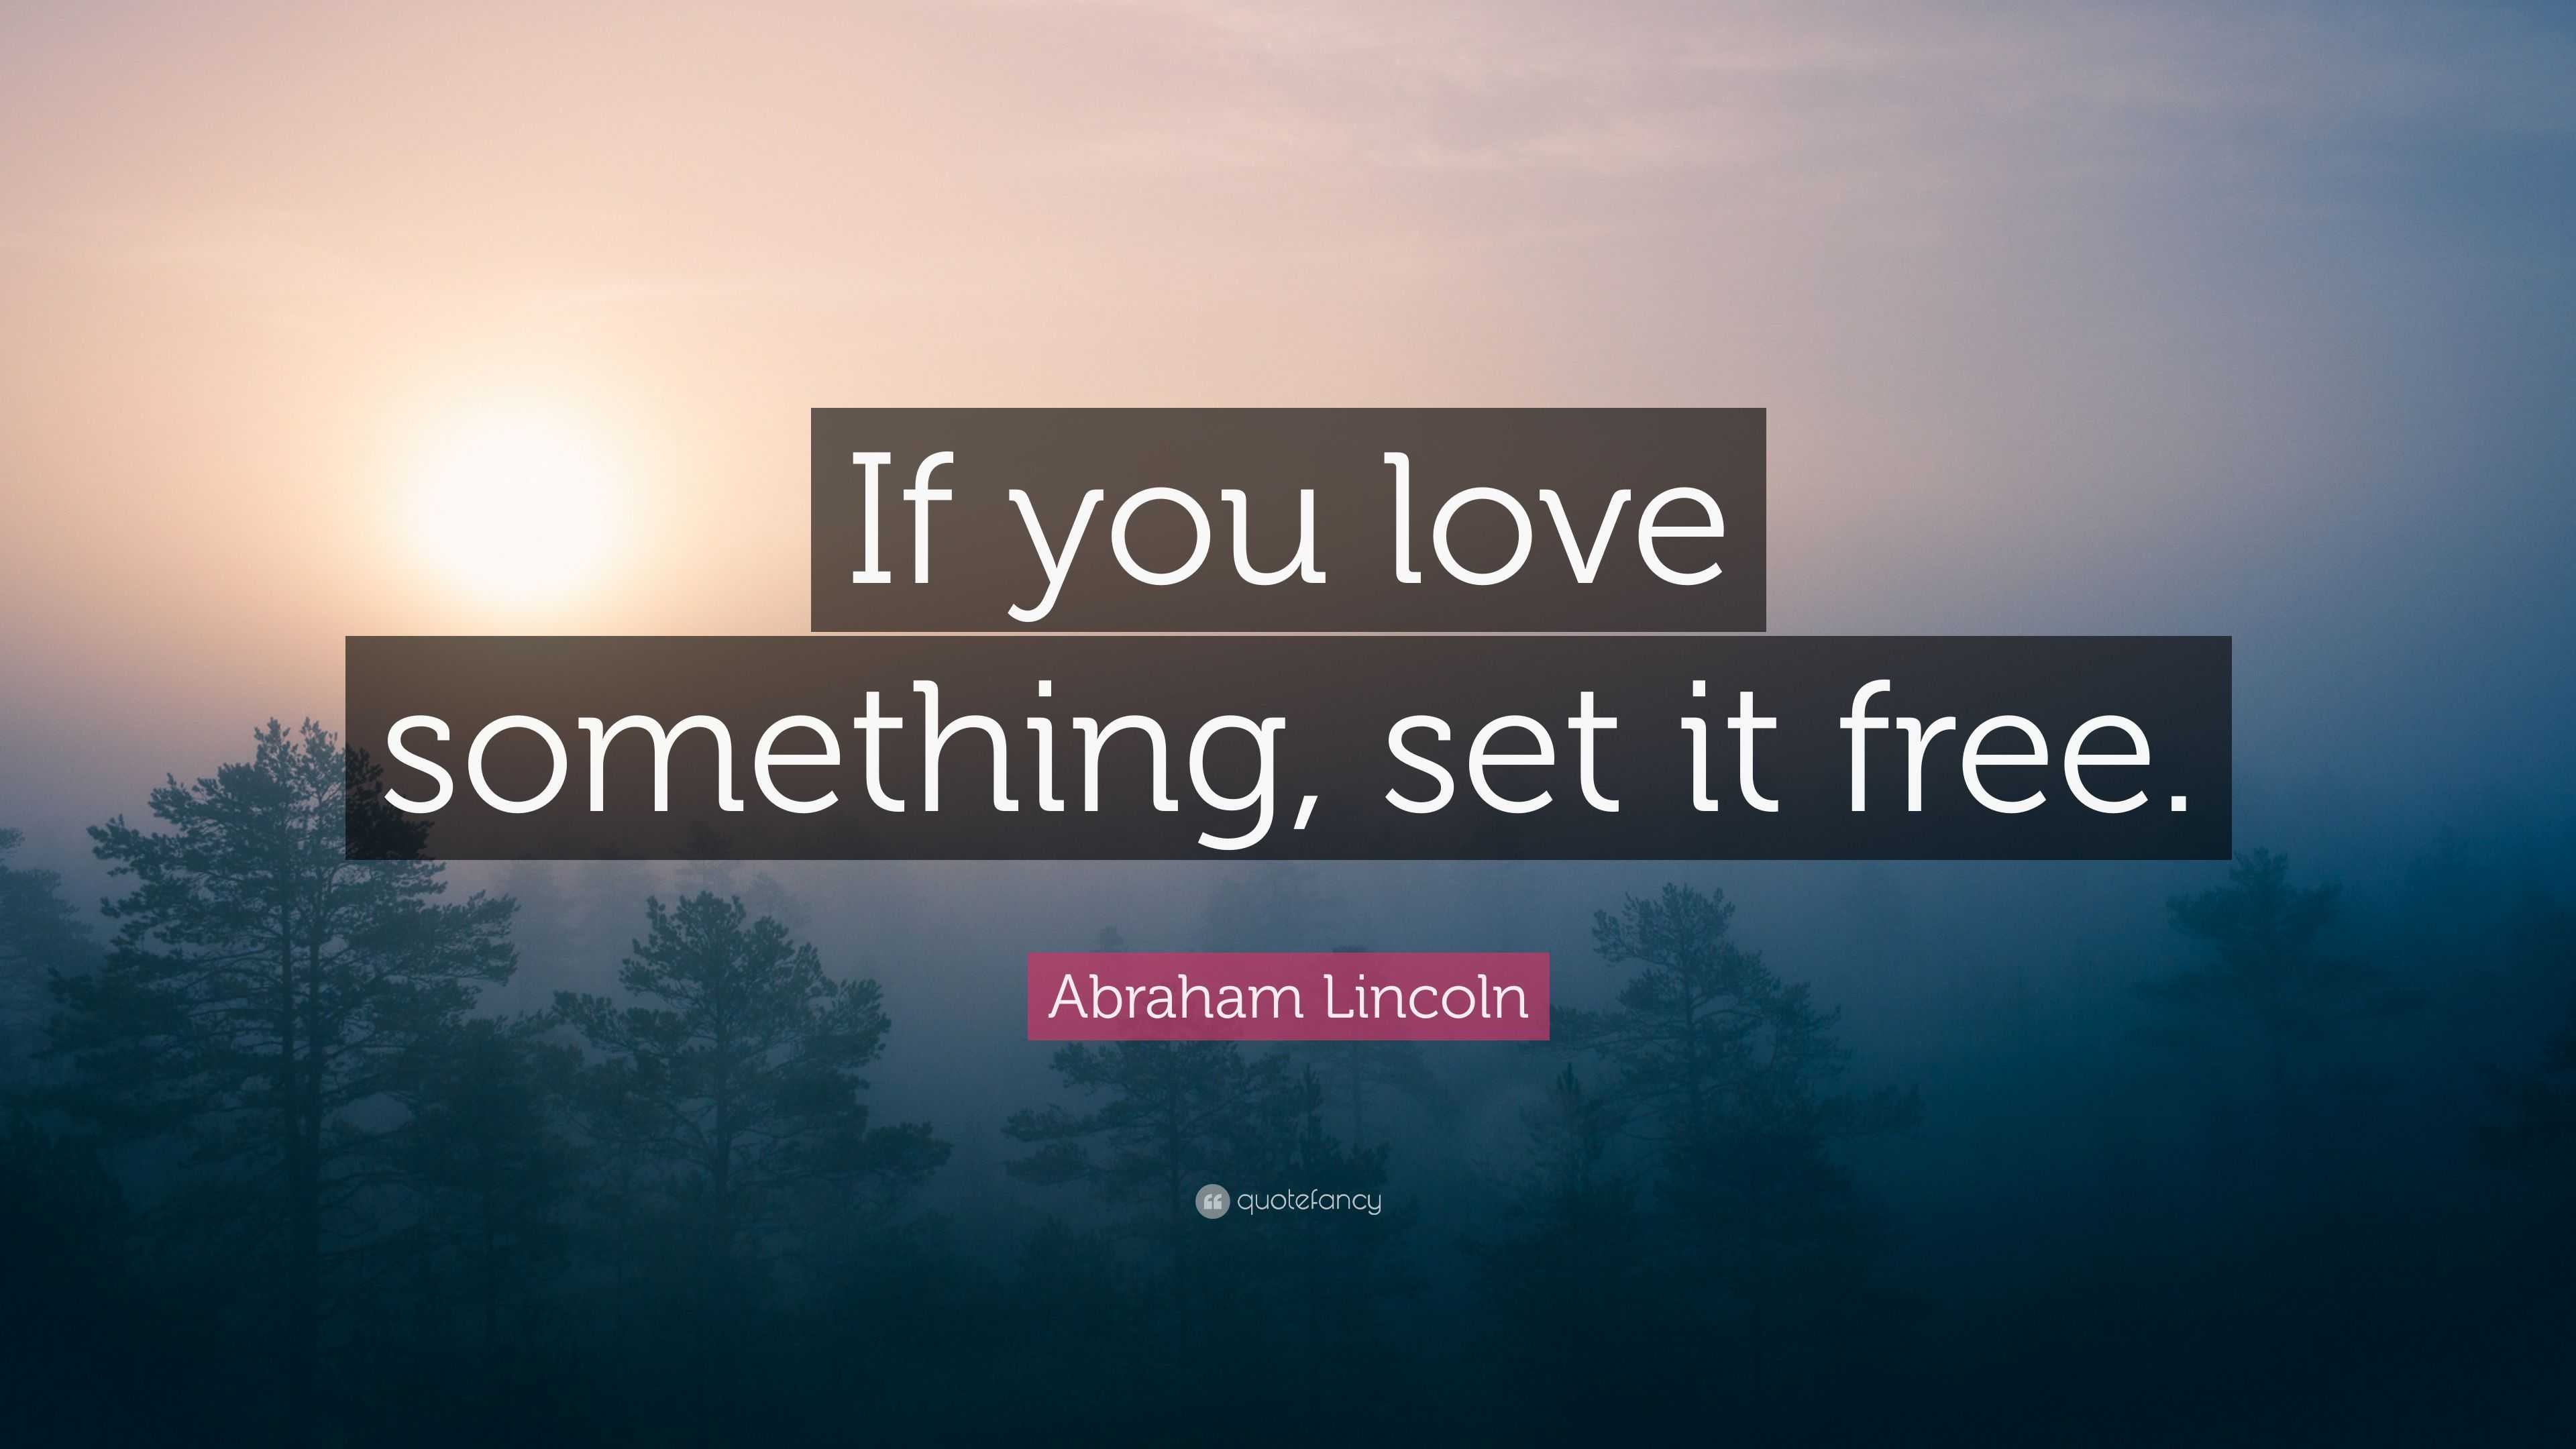 Abraham Lincoln Quote “If you love something set it free ”